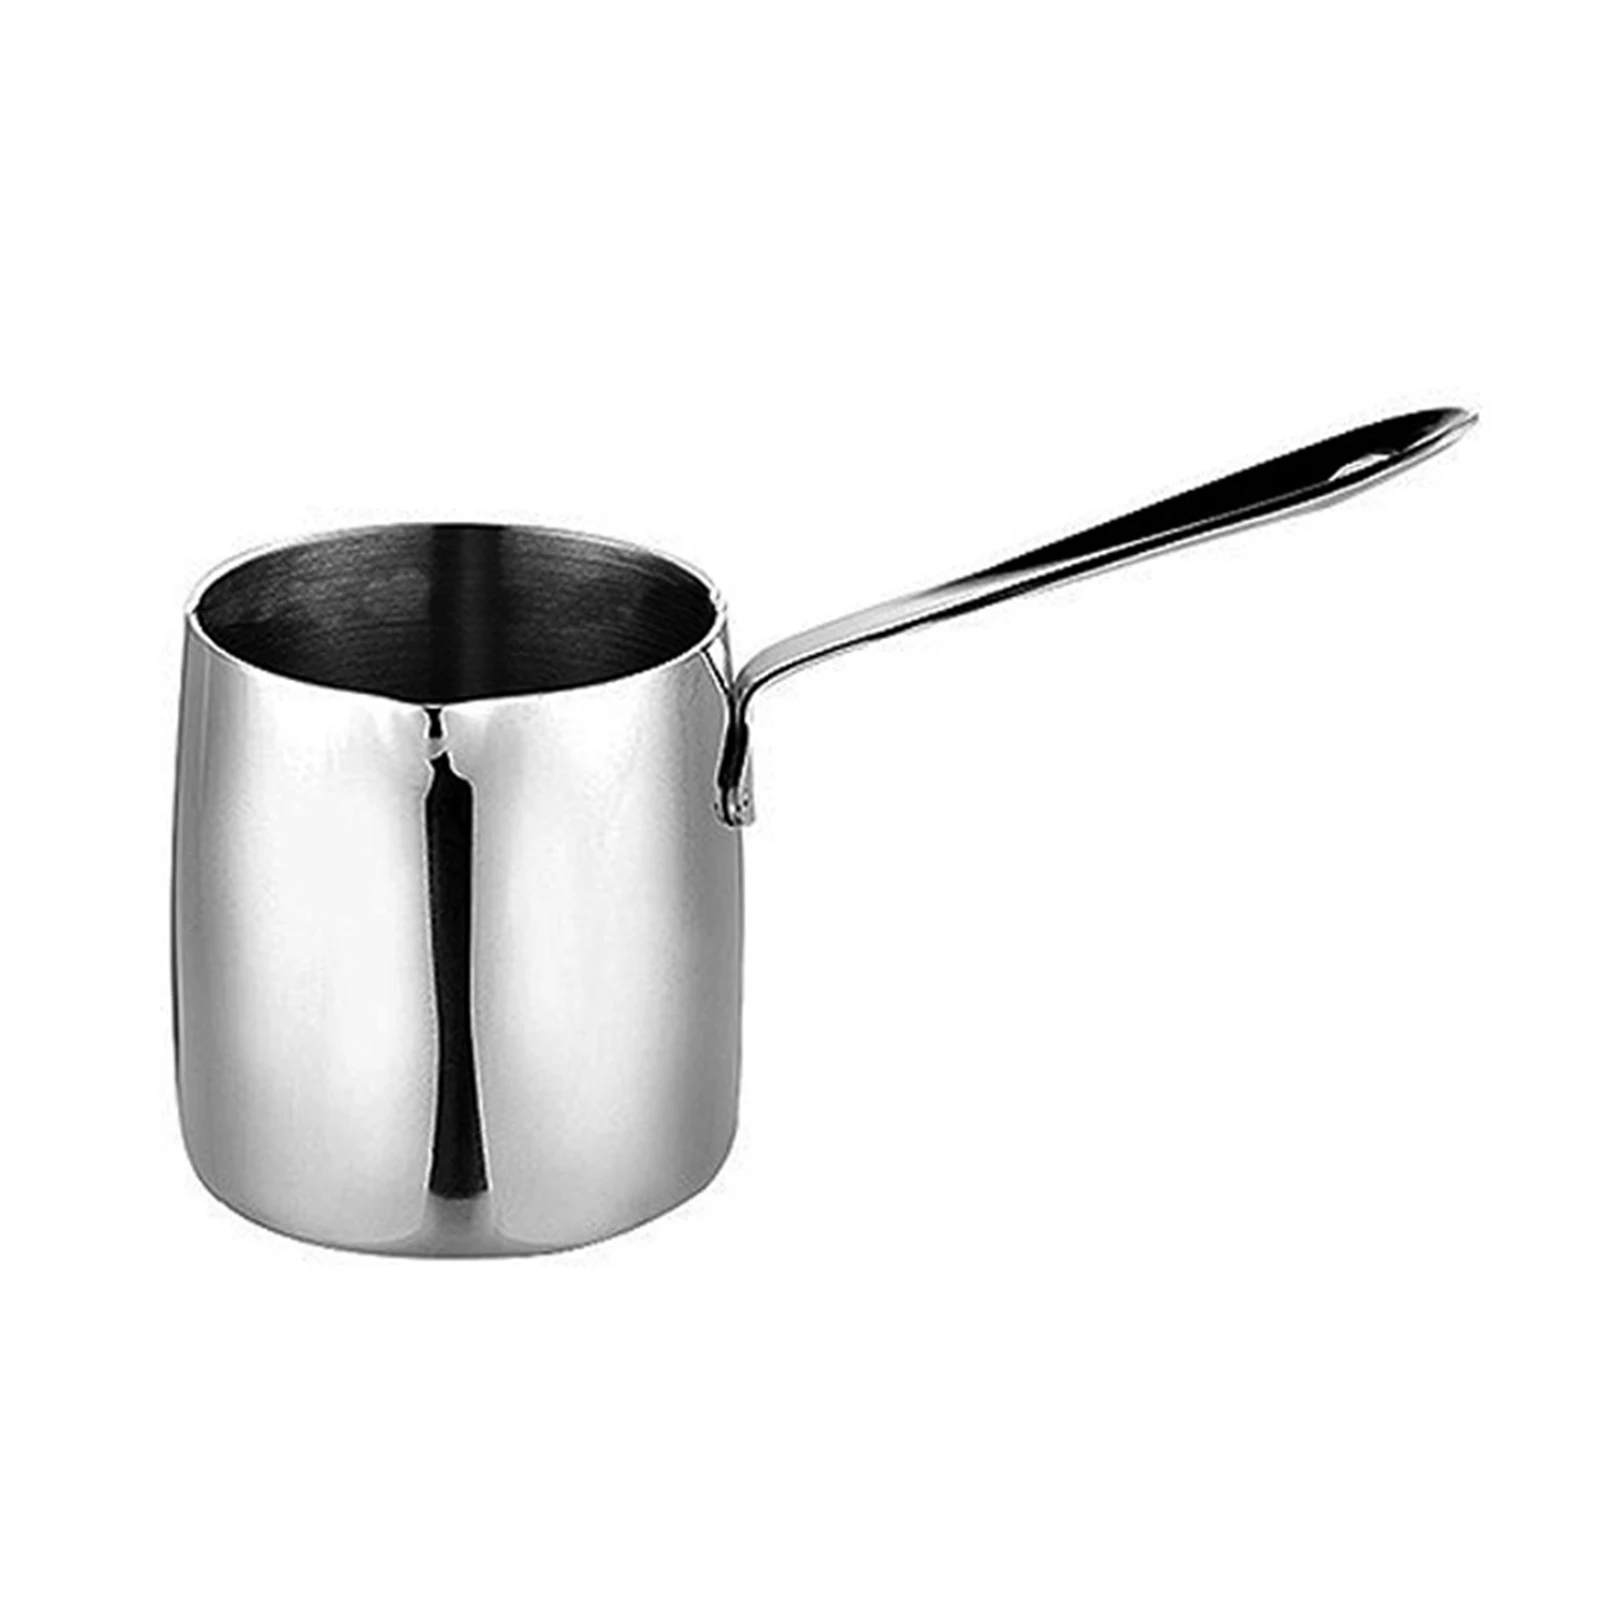 

Stainless Steel Milk Pan With Ergonomically Shaped Handle Silver Sauce Pan Cookware Saucepan Kitchen Utensils Gadgets Christ